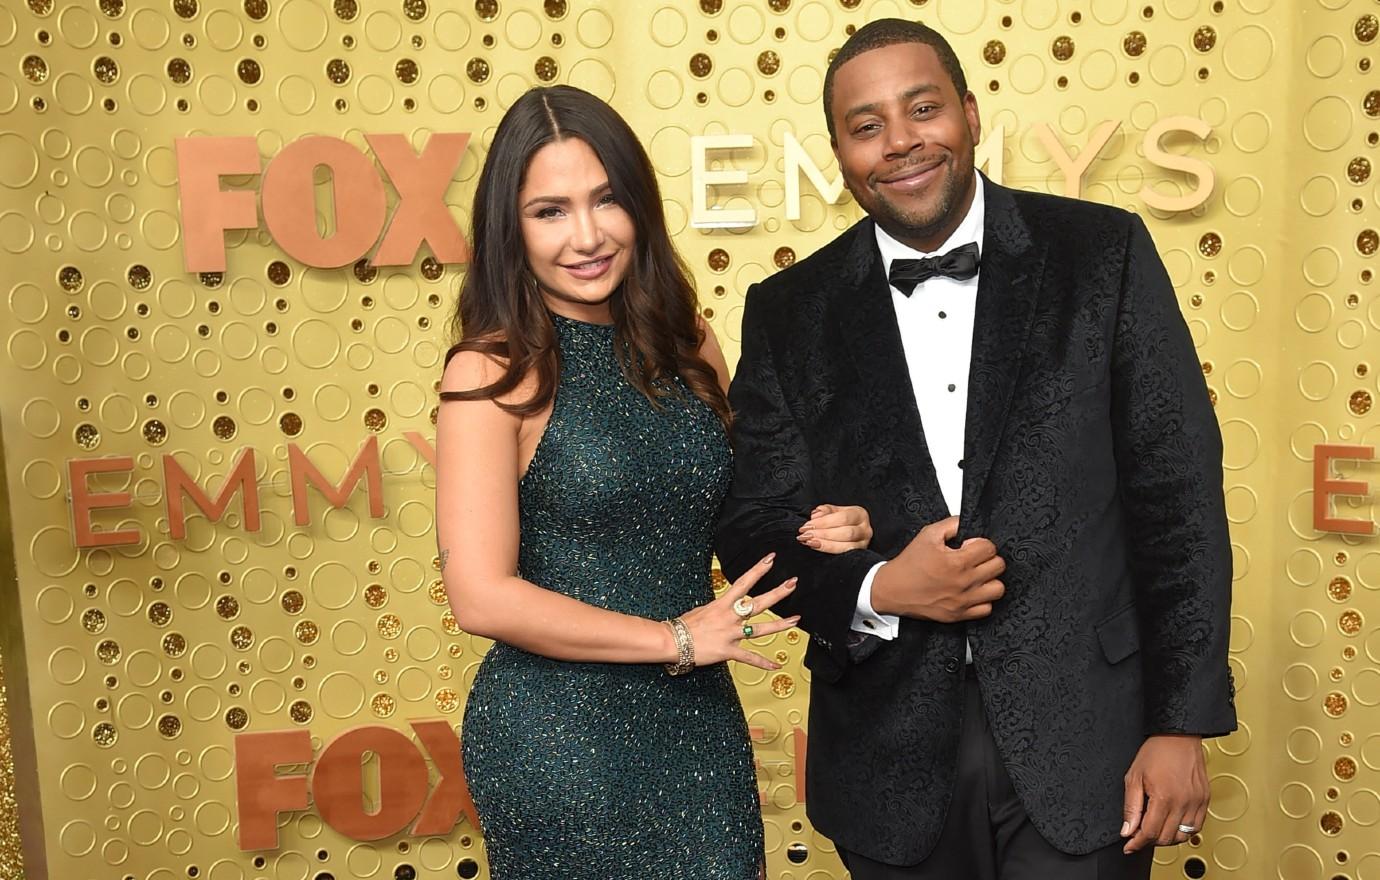 Is Kenan Thompson Dating 19 Year Old Aria Lisslo?